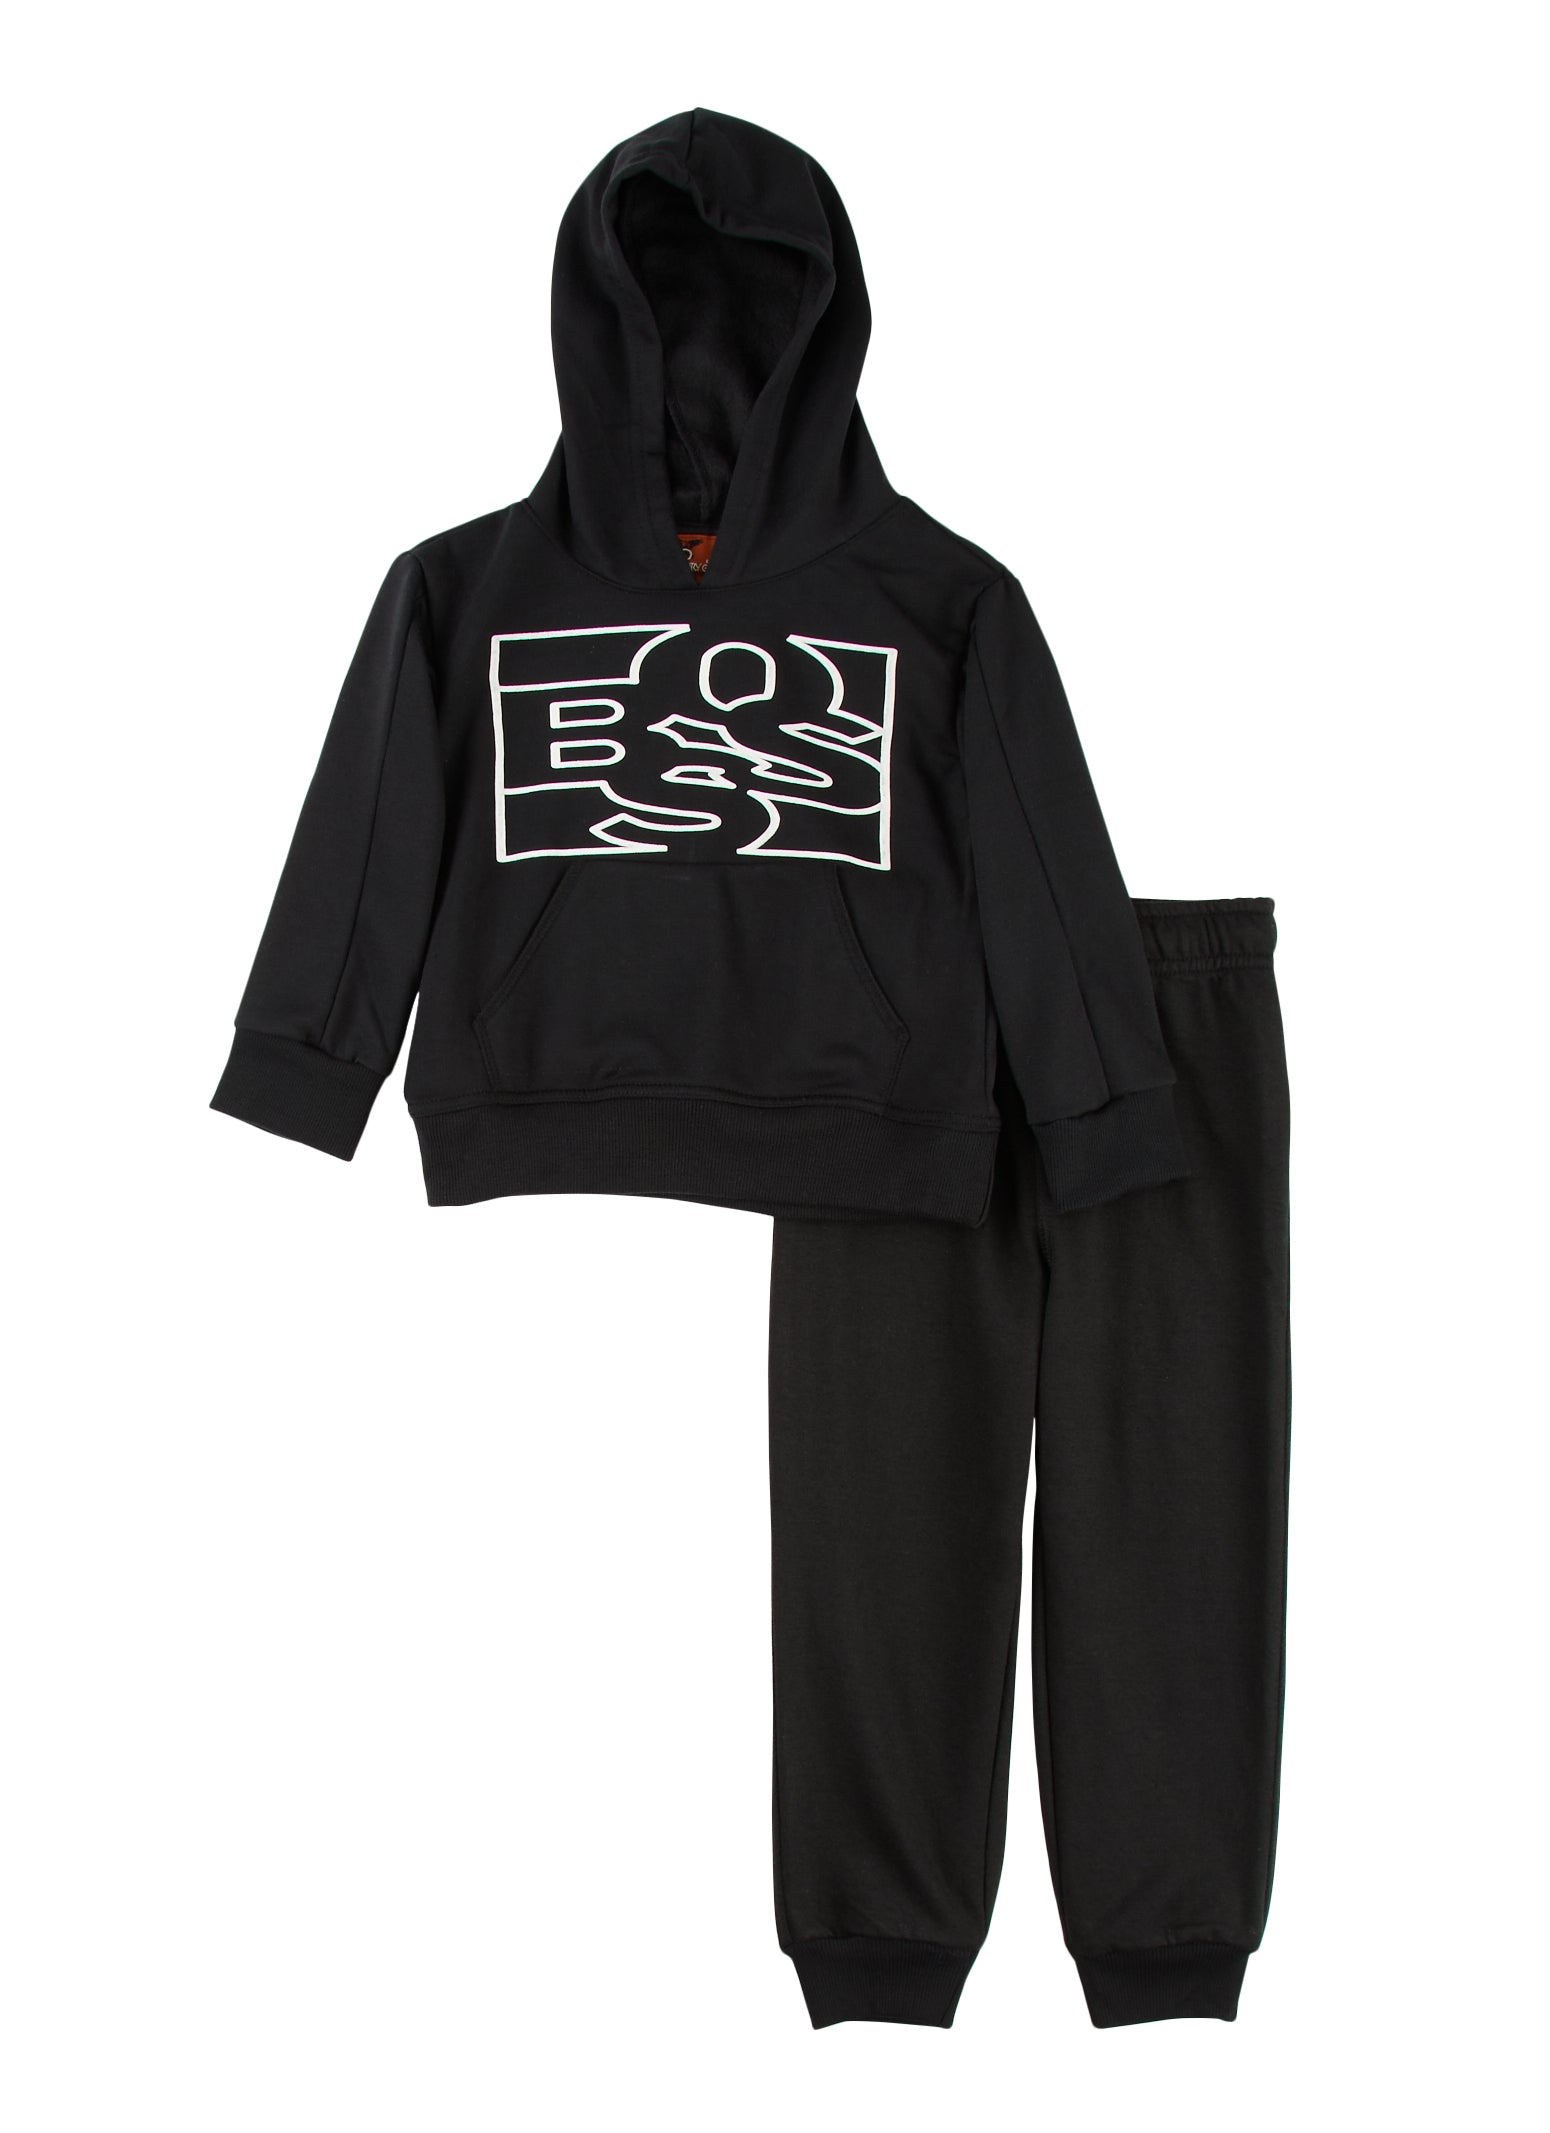 Little Boys Fleece Boss Graphic Pullover Hoodie and Joggers, Black, Size 4